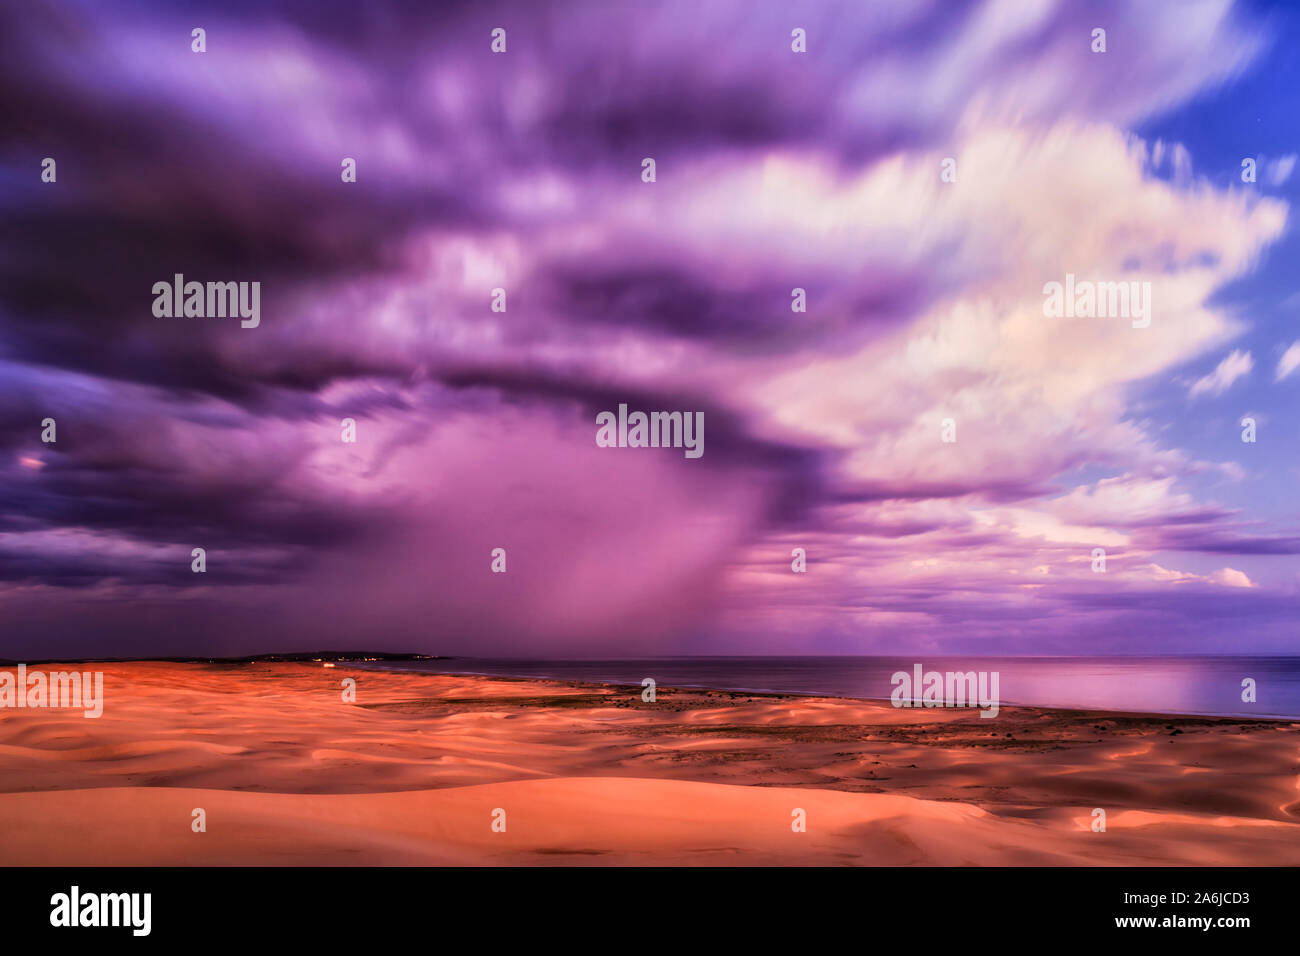 High sky with blurred clouds at sunset reflecting last day light over Pacific ocean and sand dunes of Stockton beach in Australia - colourful seascape Stock Photo